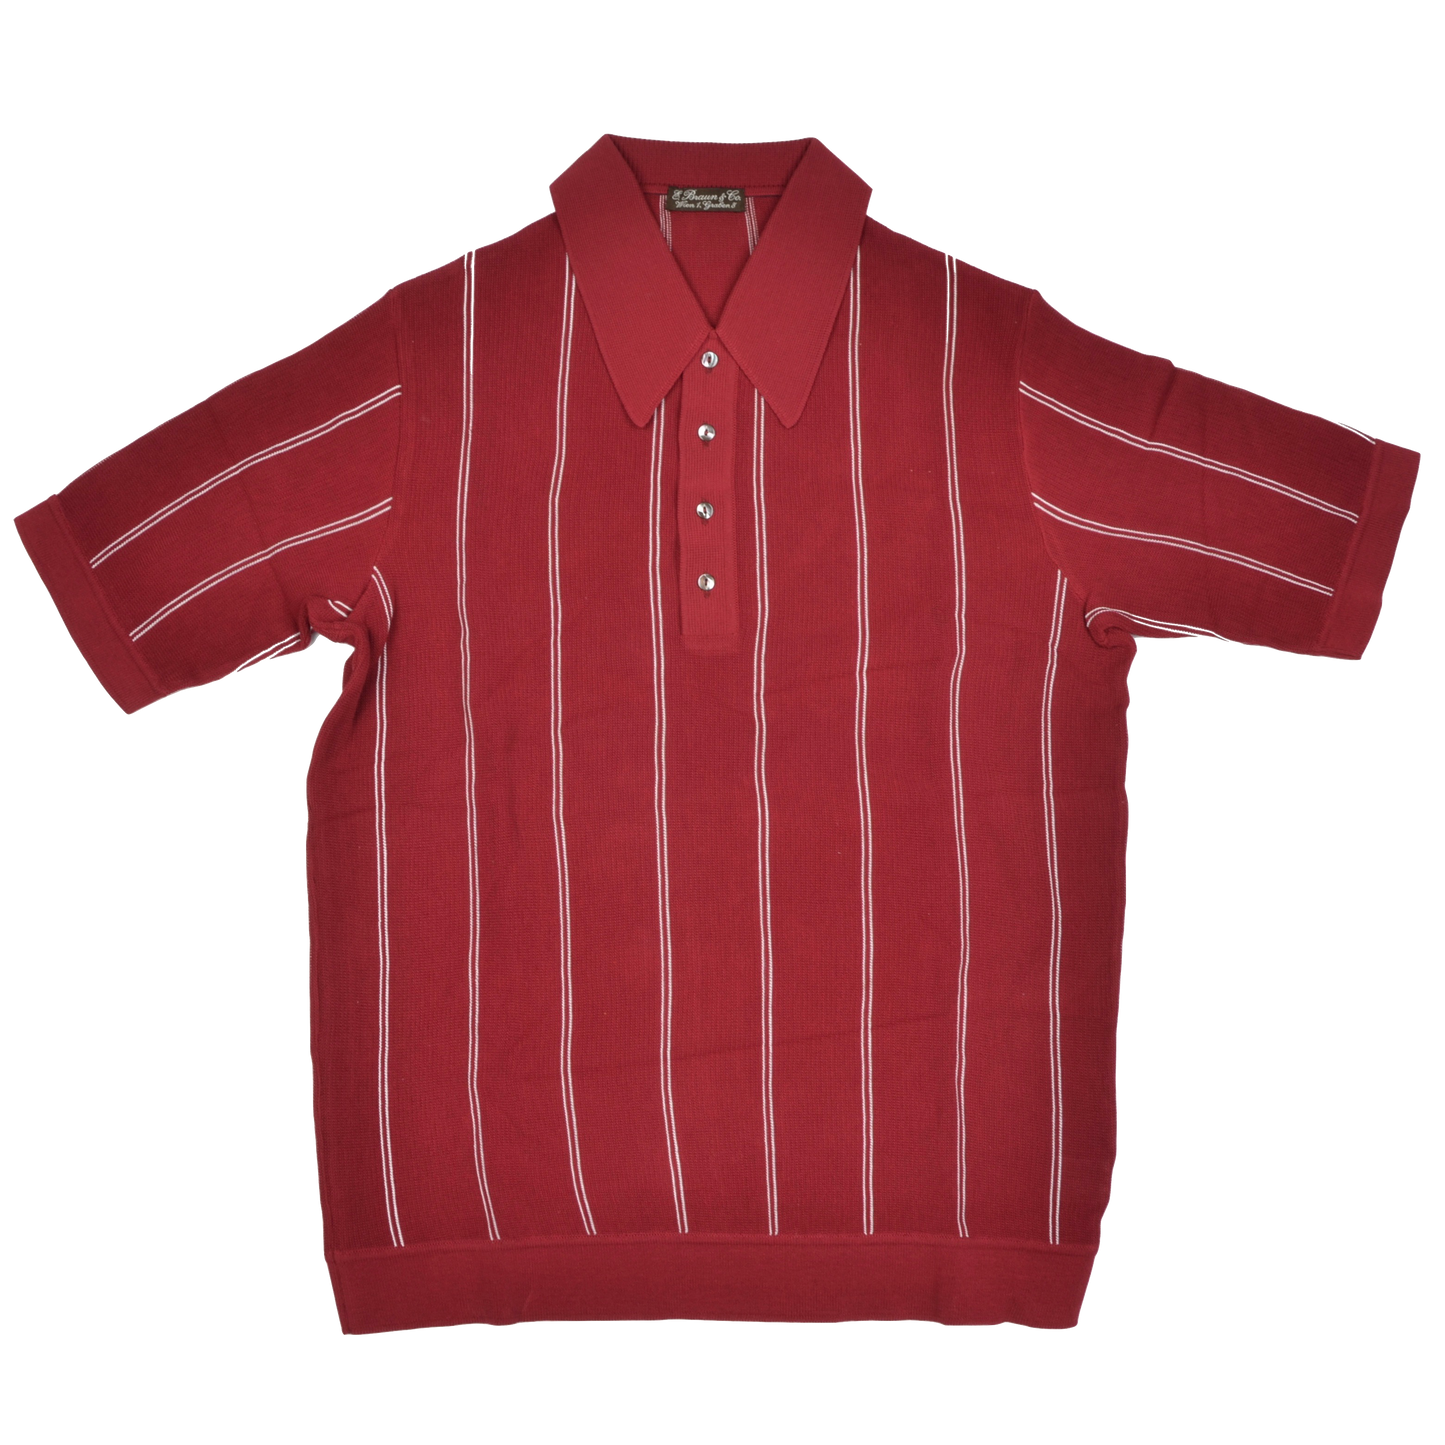 Knit Polo Shirt by Zimmerli for E. Braun & Co. - Burgundy, XL